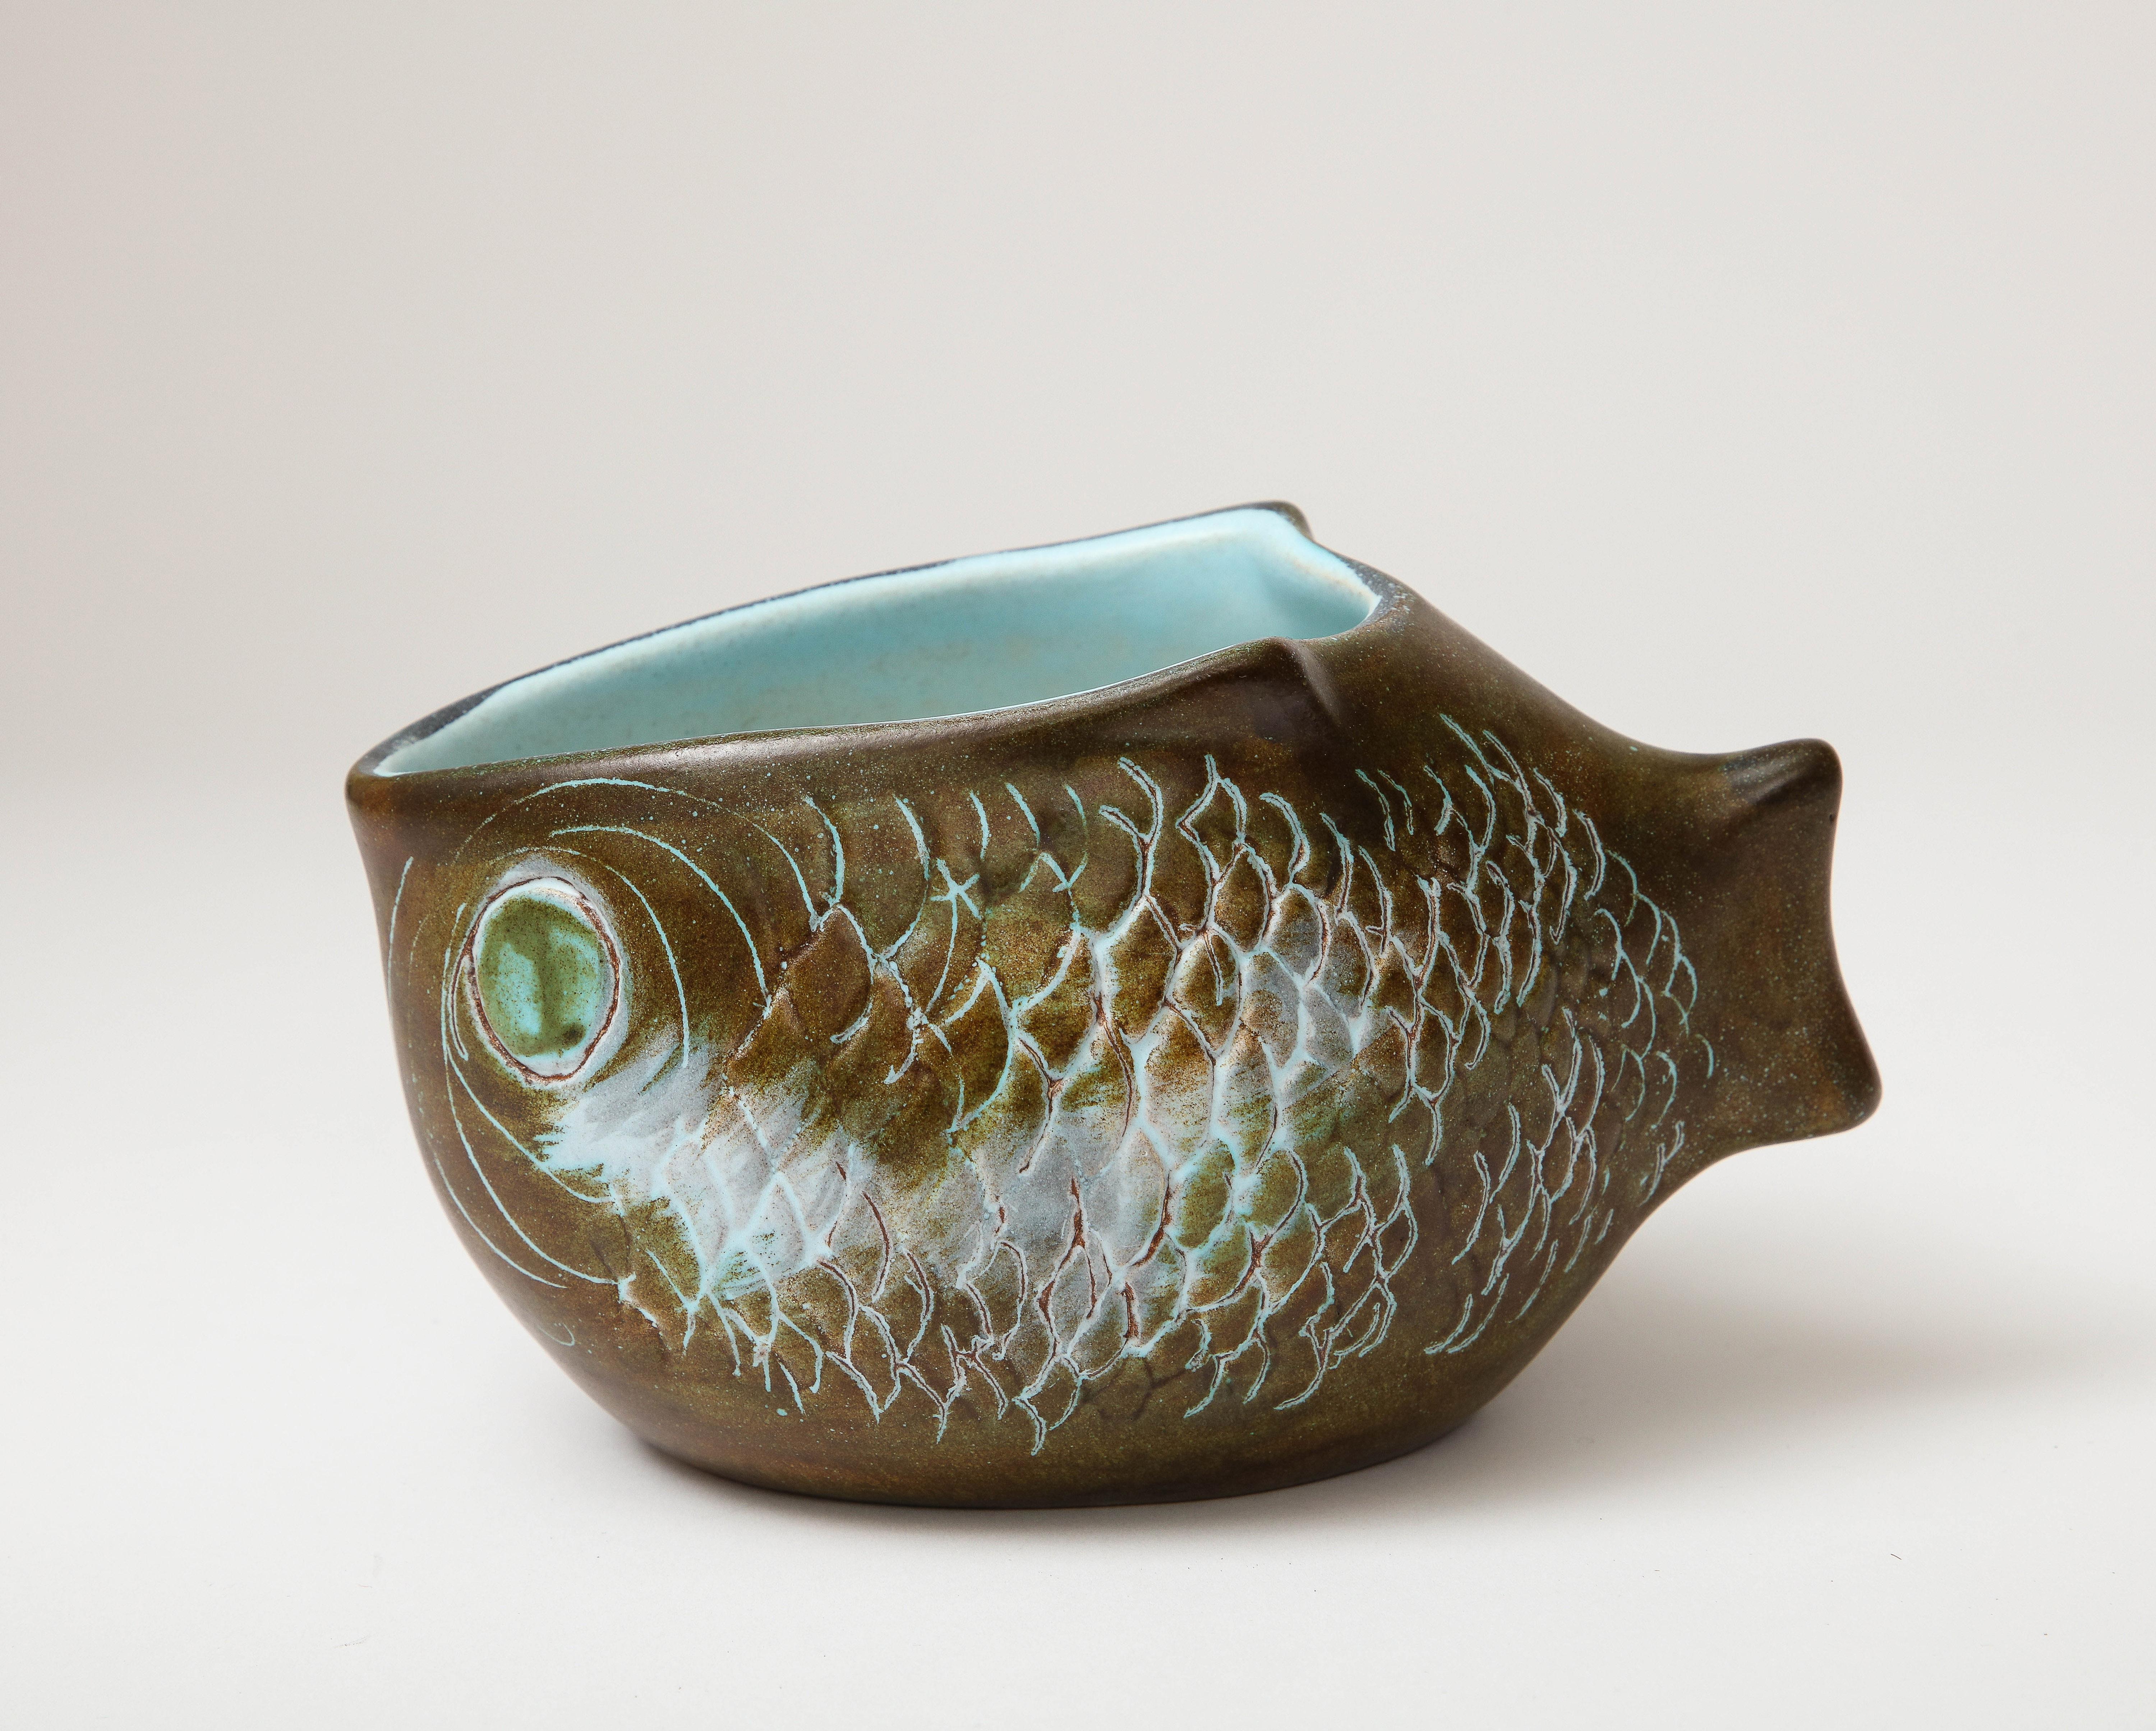 Glazed Ceramic Bowl in the Shape of a Fish, Guillot, c. 1960 For Sale 5